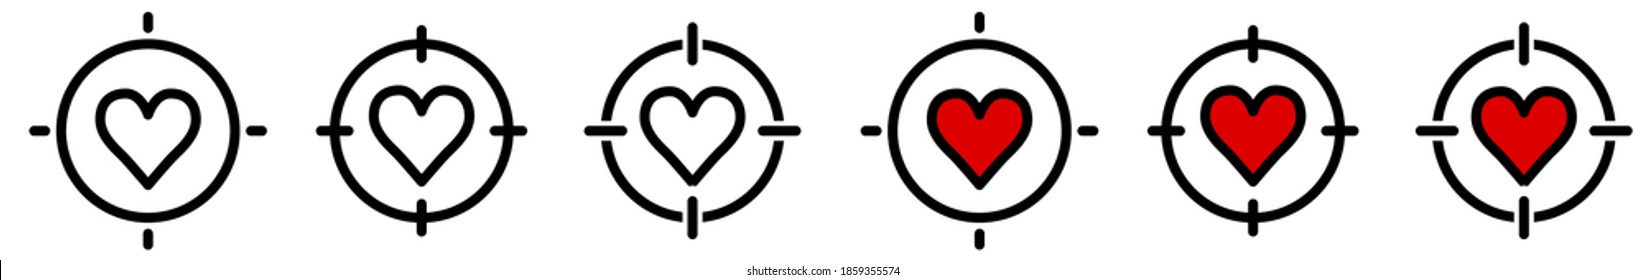 Heart icon in target crosshair. Focus on love or emotions concept, multiple versions